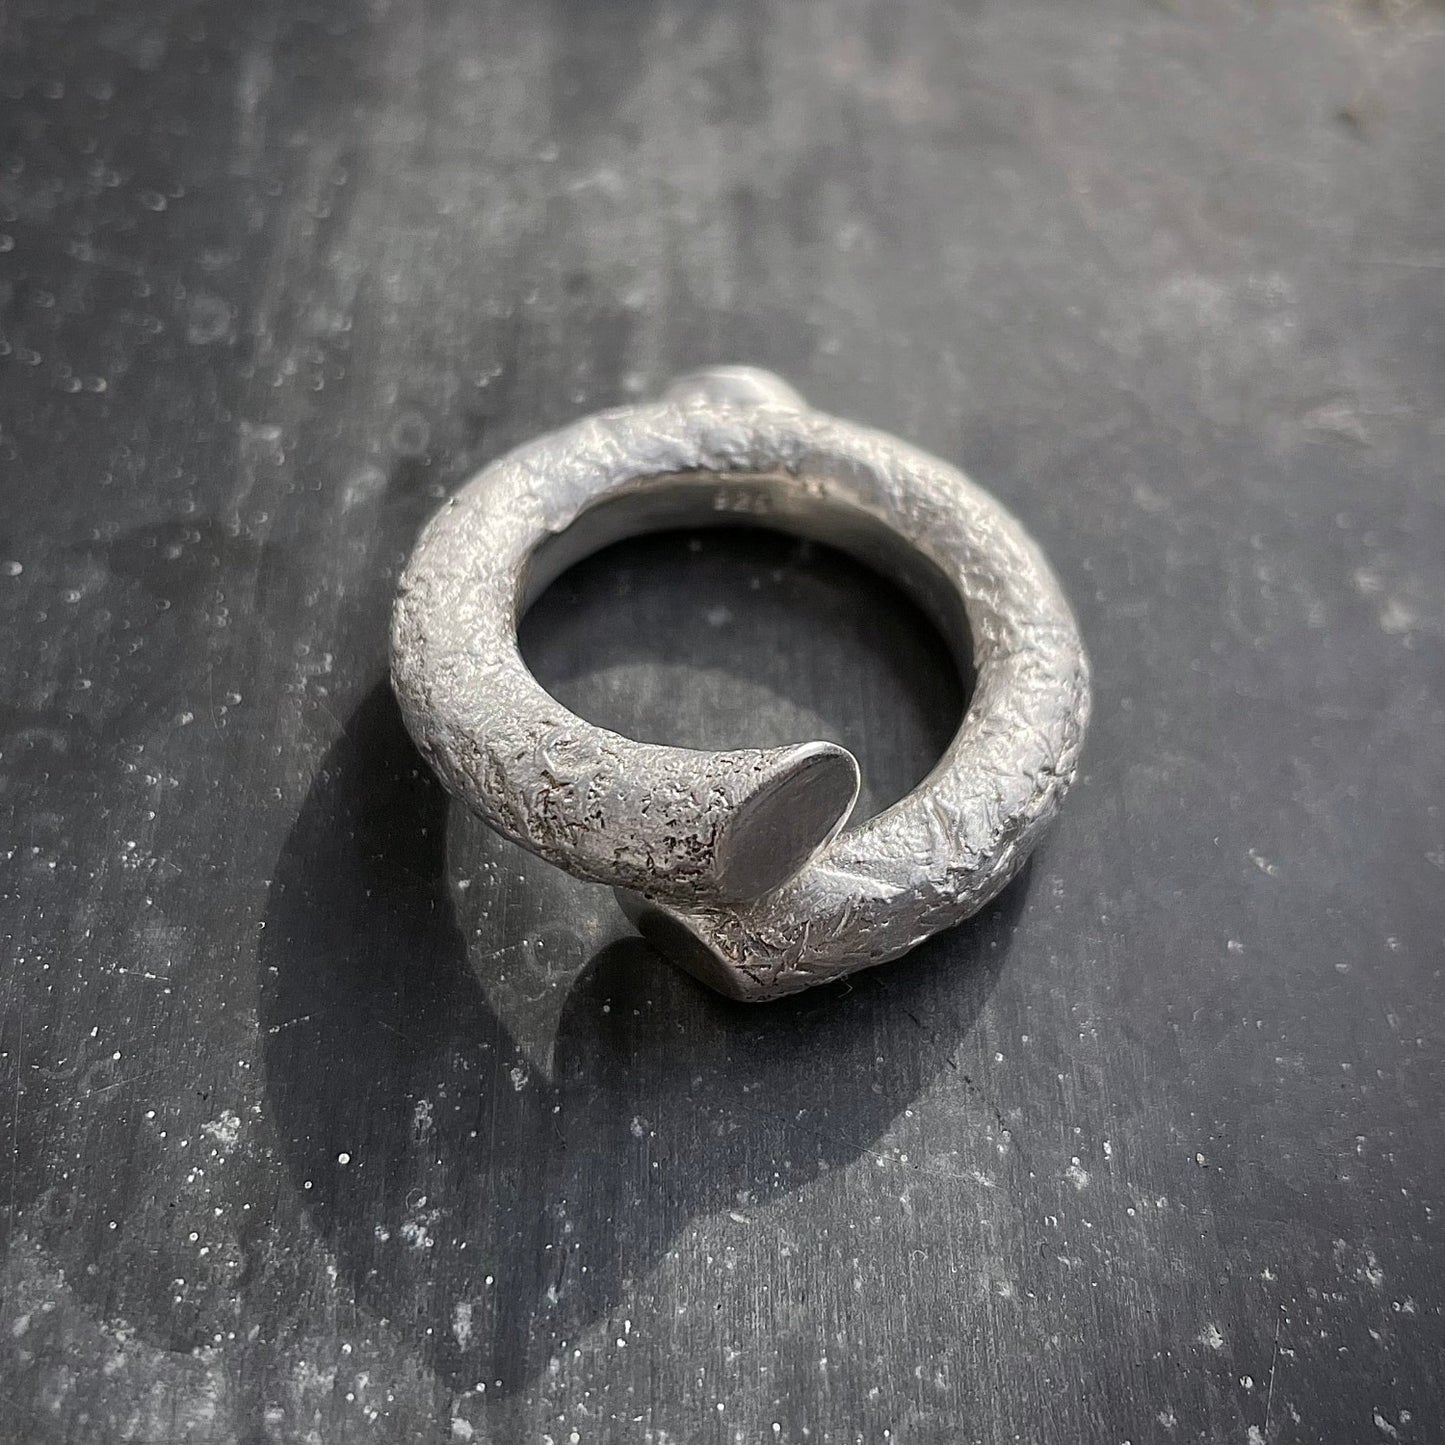 B1 ring - Silver - with rough surface structure